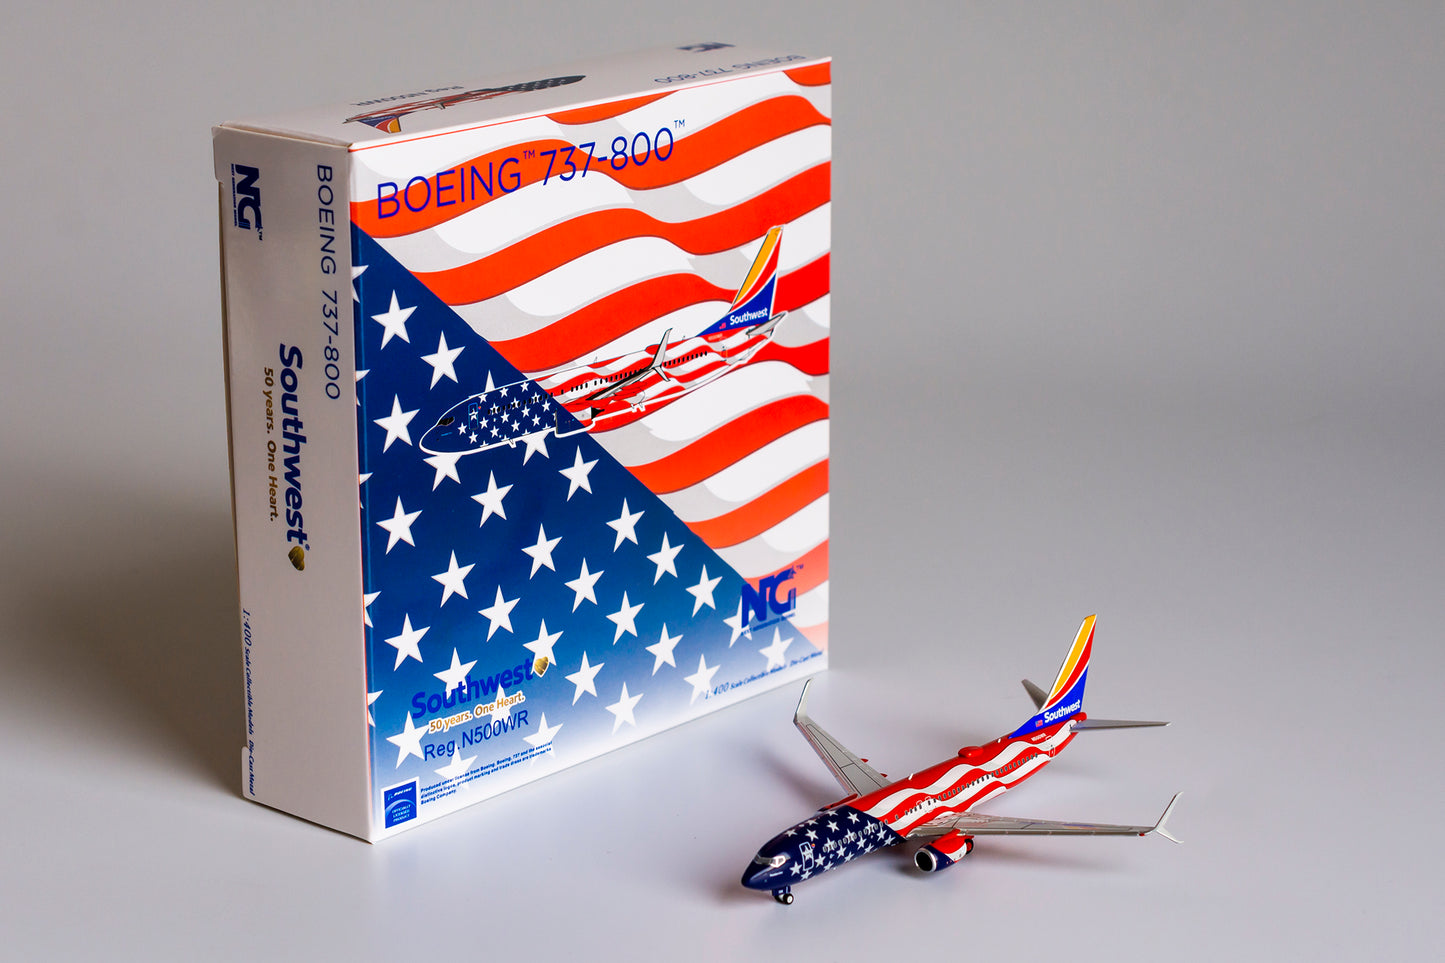 1:400 NG Models Southwest Airlines Boeing 737-800 "Freedom One" N500WR NG58110